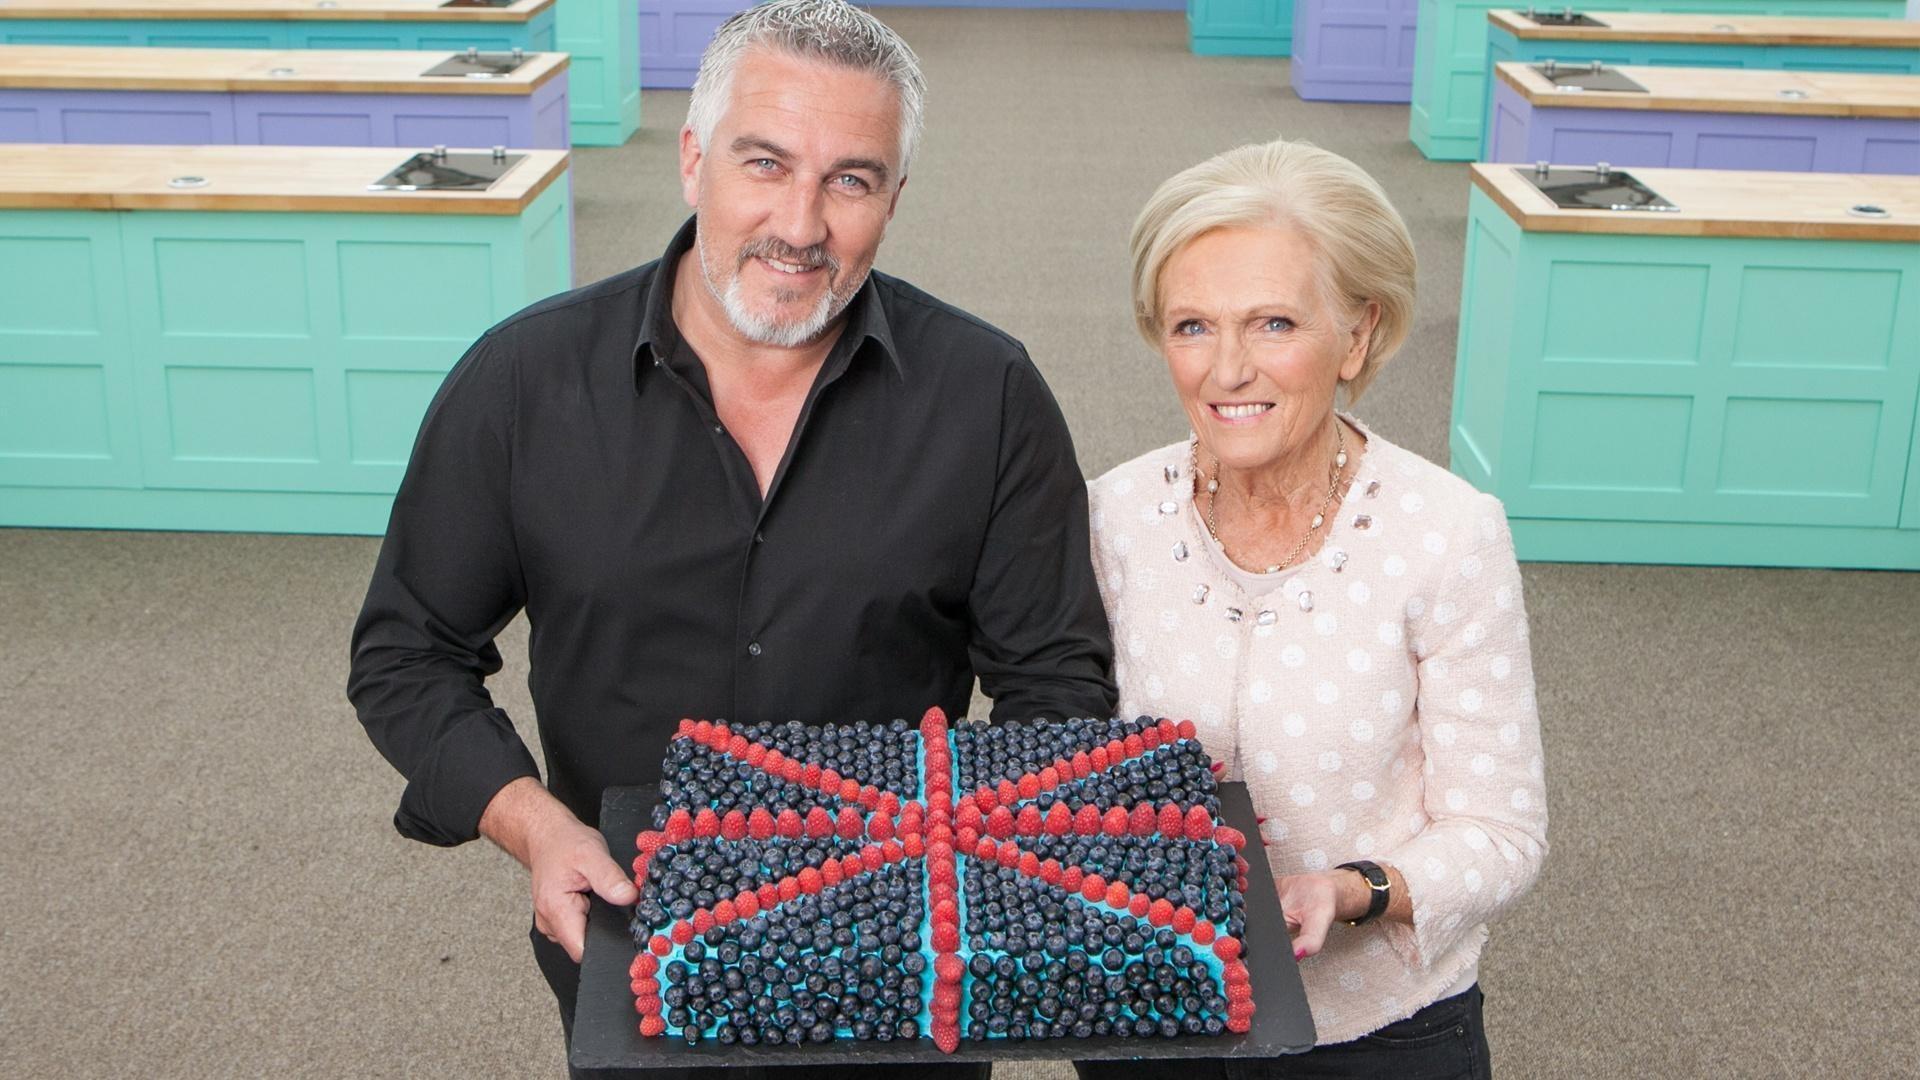 Paul Hollywood and Mary Berry hold a cake with berries on it that looks like the United Kingdom flag.